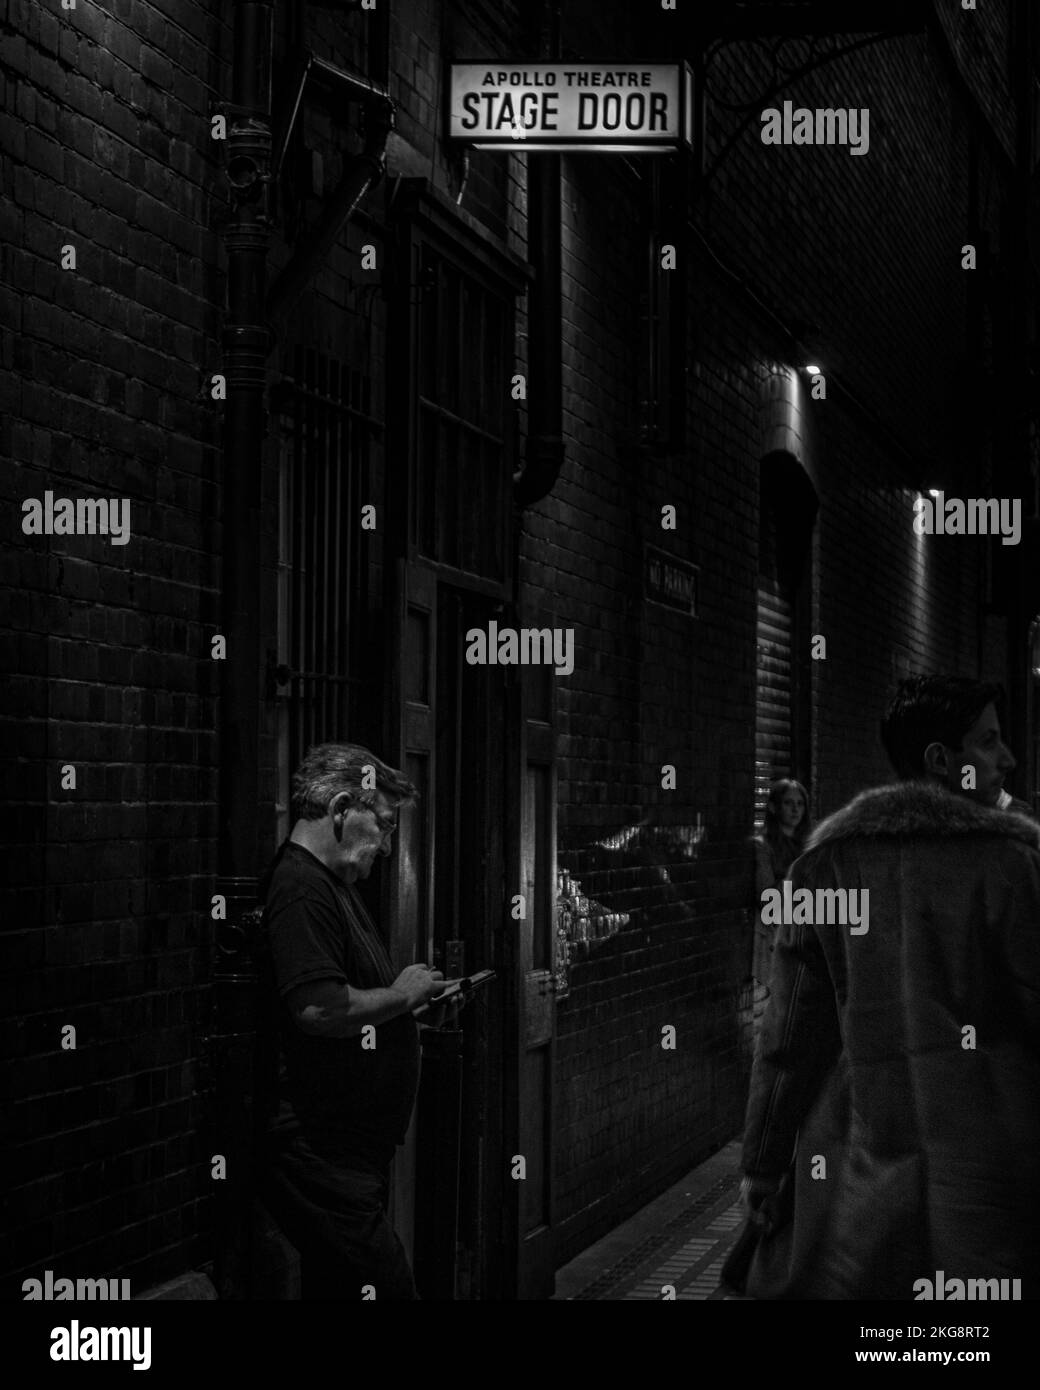 A black and white shot of a man smoking cigarette and scrolling on his phone underneath a stage door sign at the Apollo Theatre, London Stock Photo